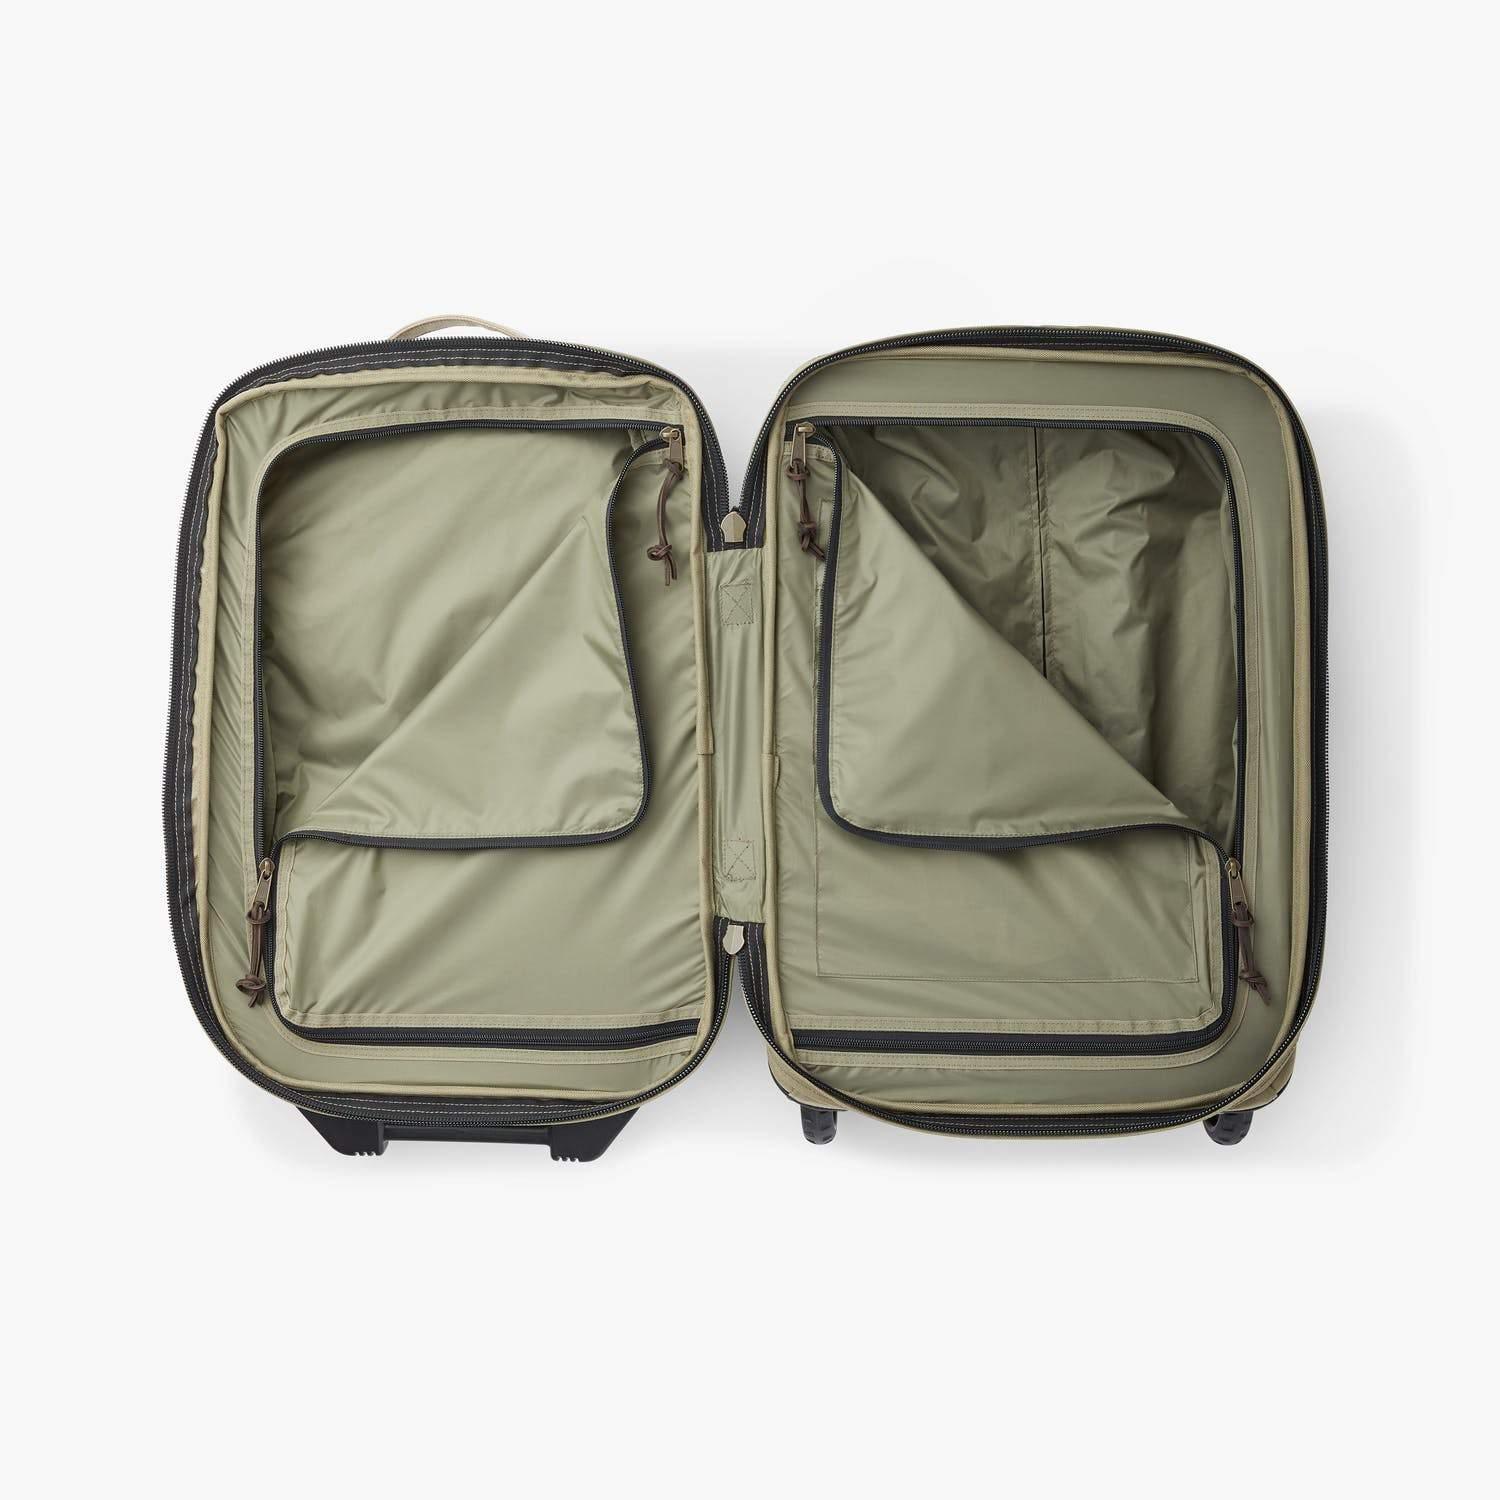 Filson Synthetic Dryden 2-wheel Carry-on Bag - Ducks Unlimited in 